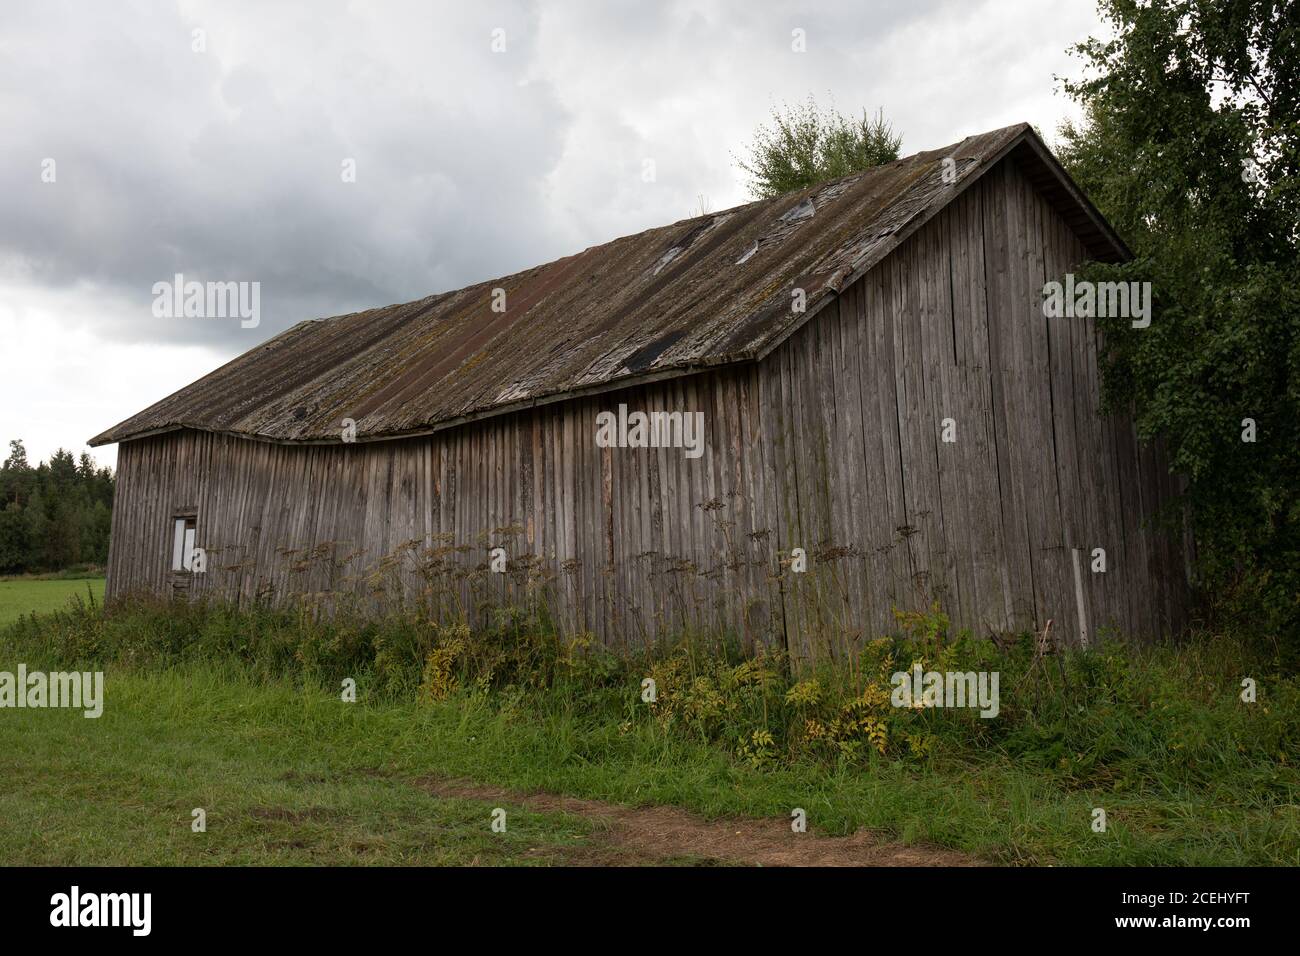 Old dilapidated barn or granary in rural countryside of Hauho, Finland Stock Photo